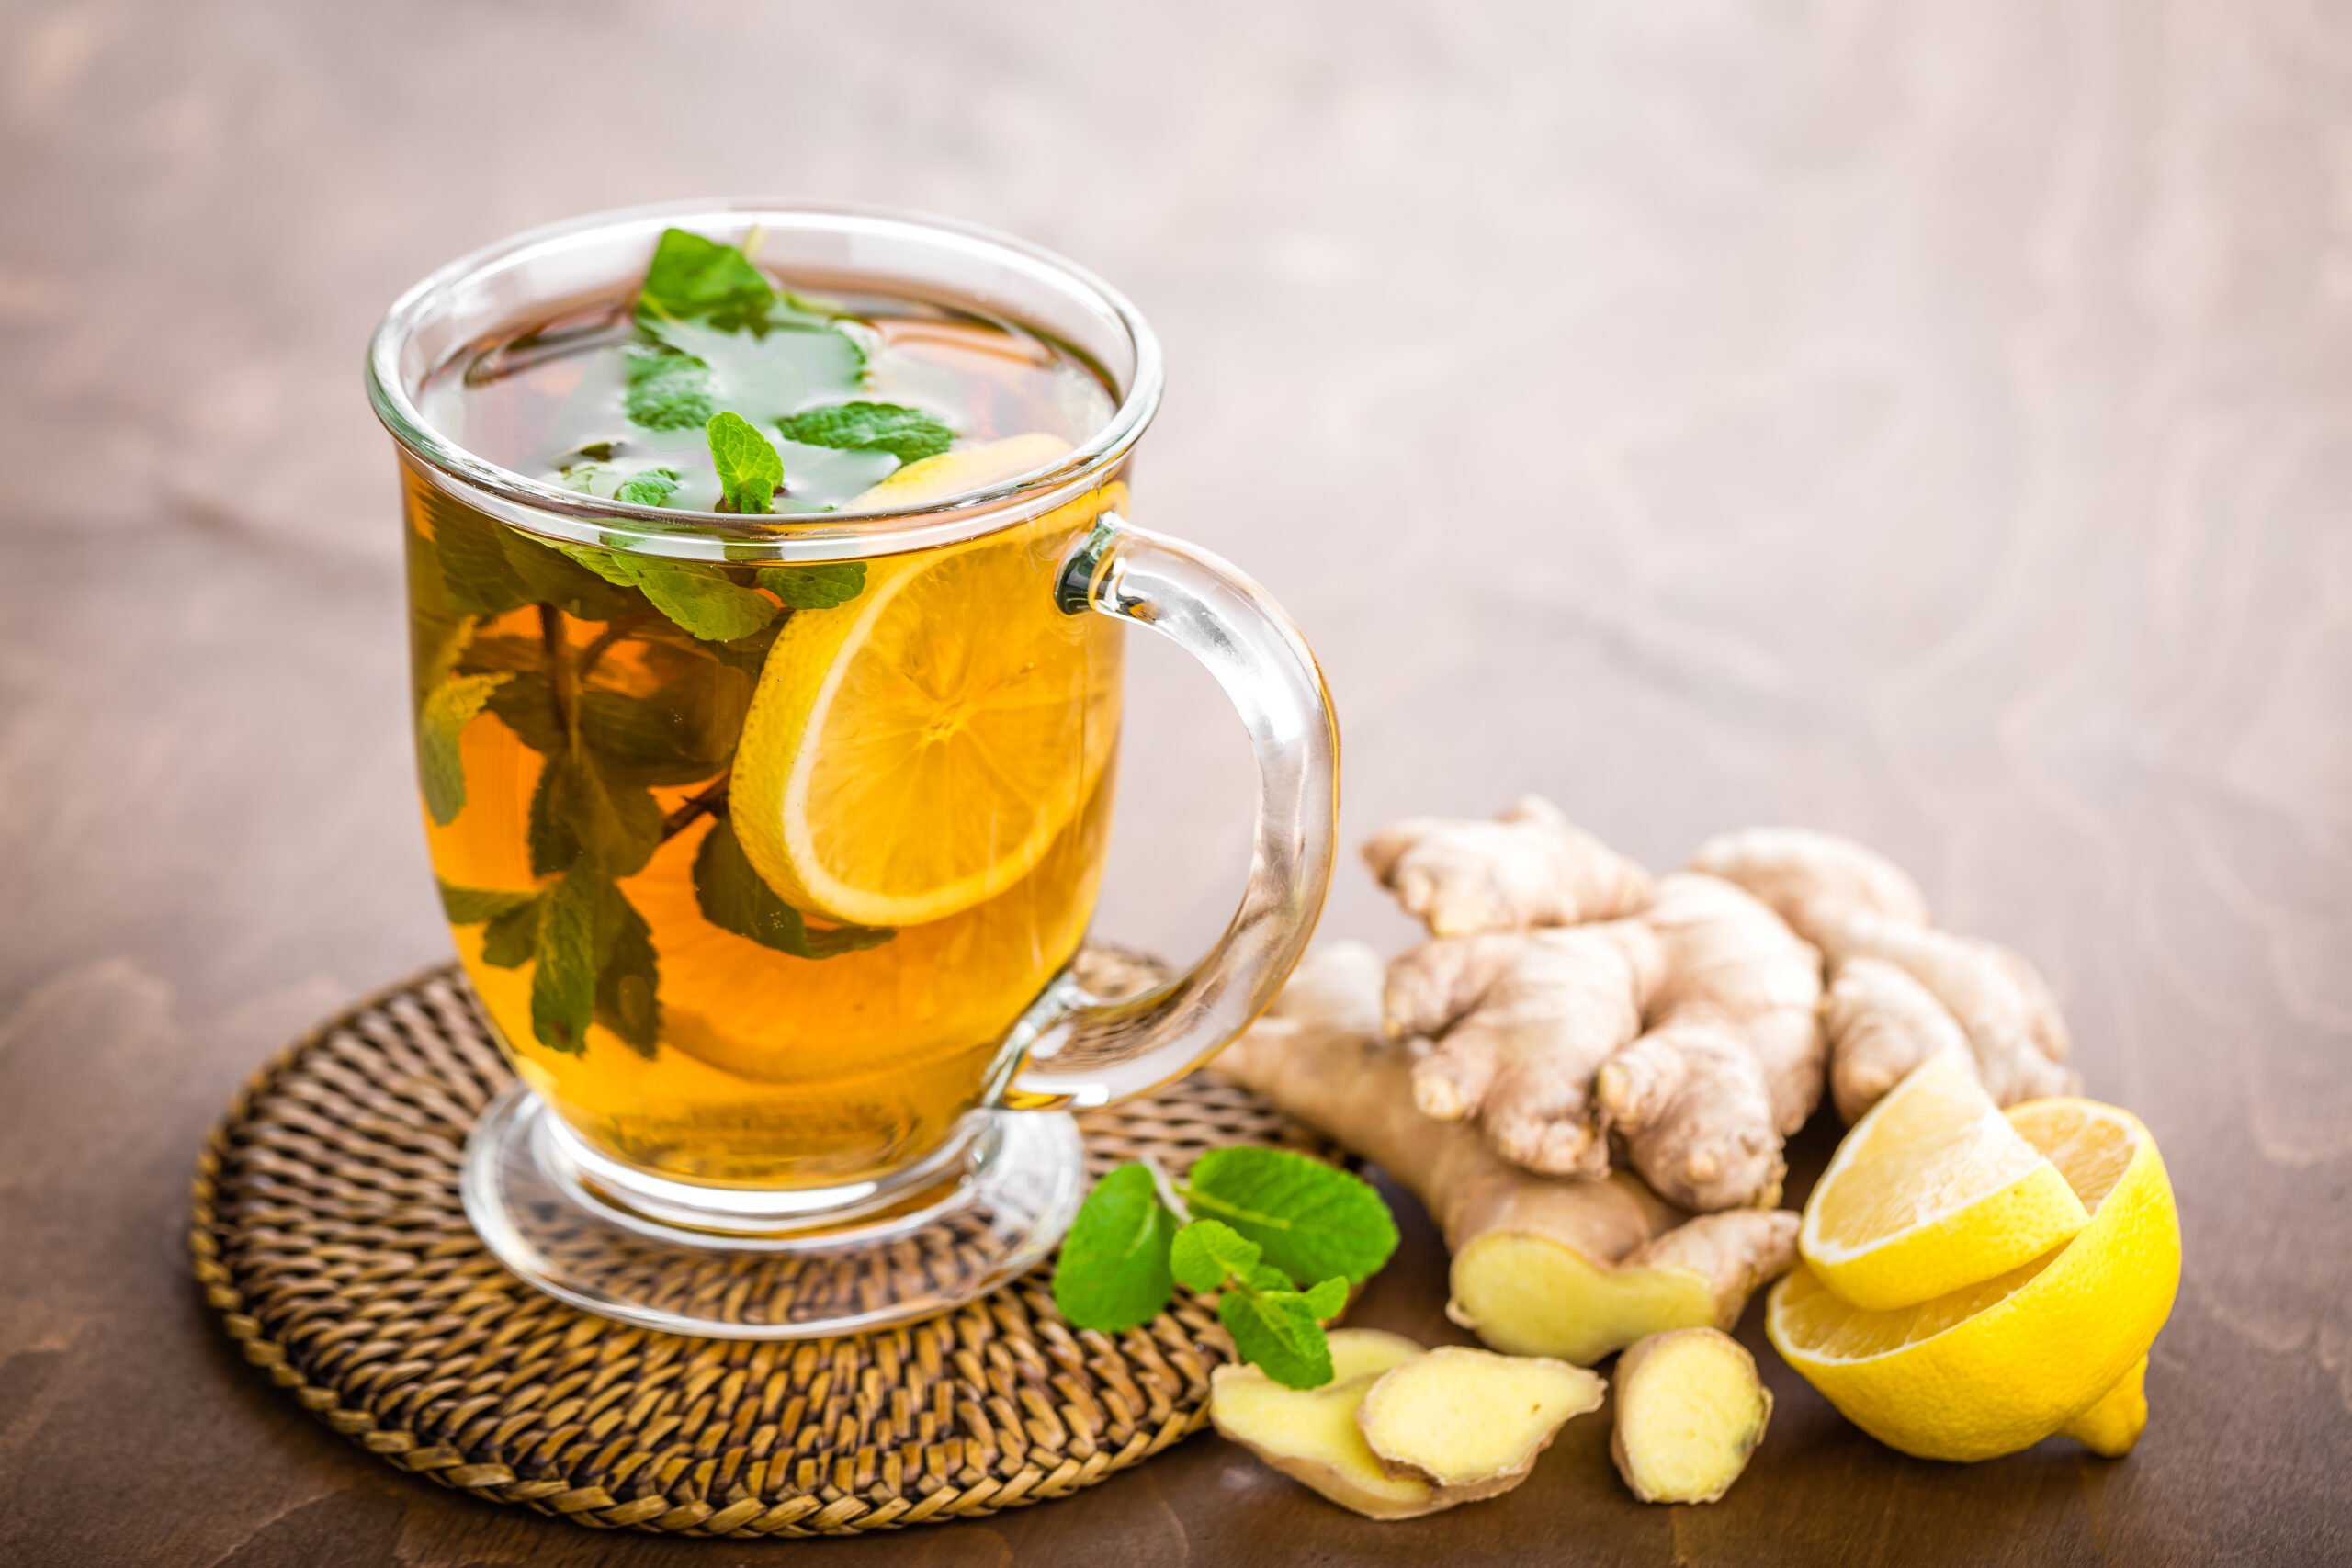 Hot herbal tea with fresh lemon, ginger and mint leaves on brown background, closeup